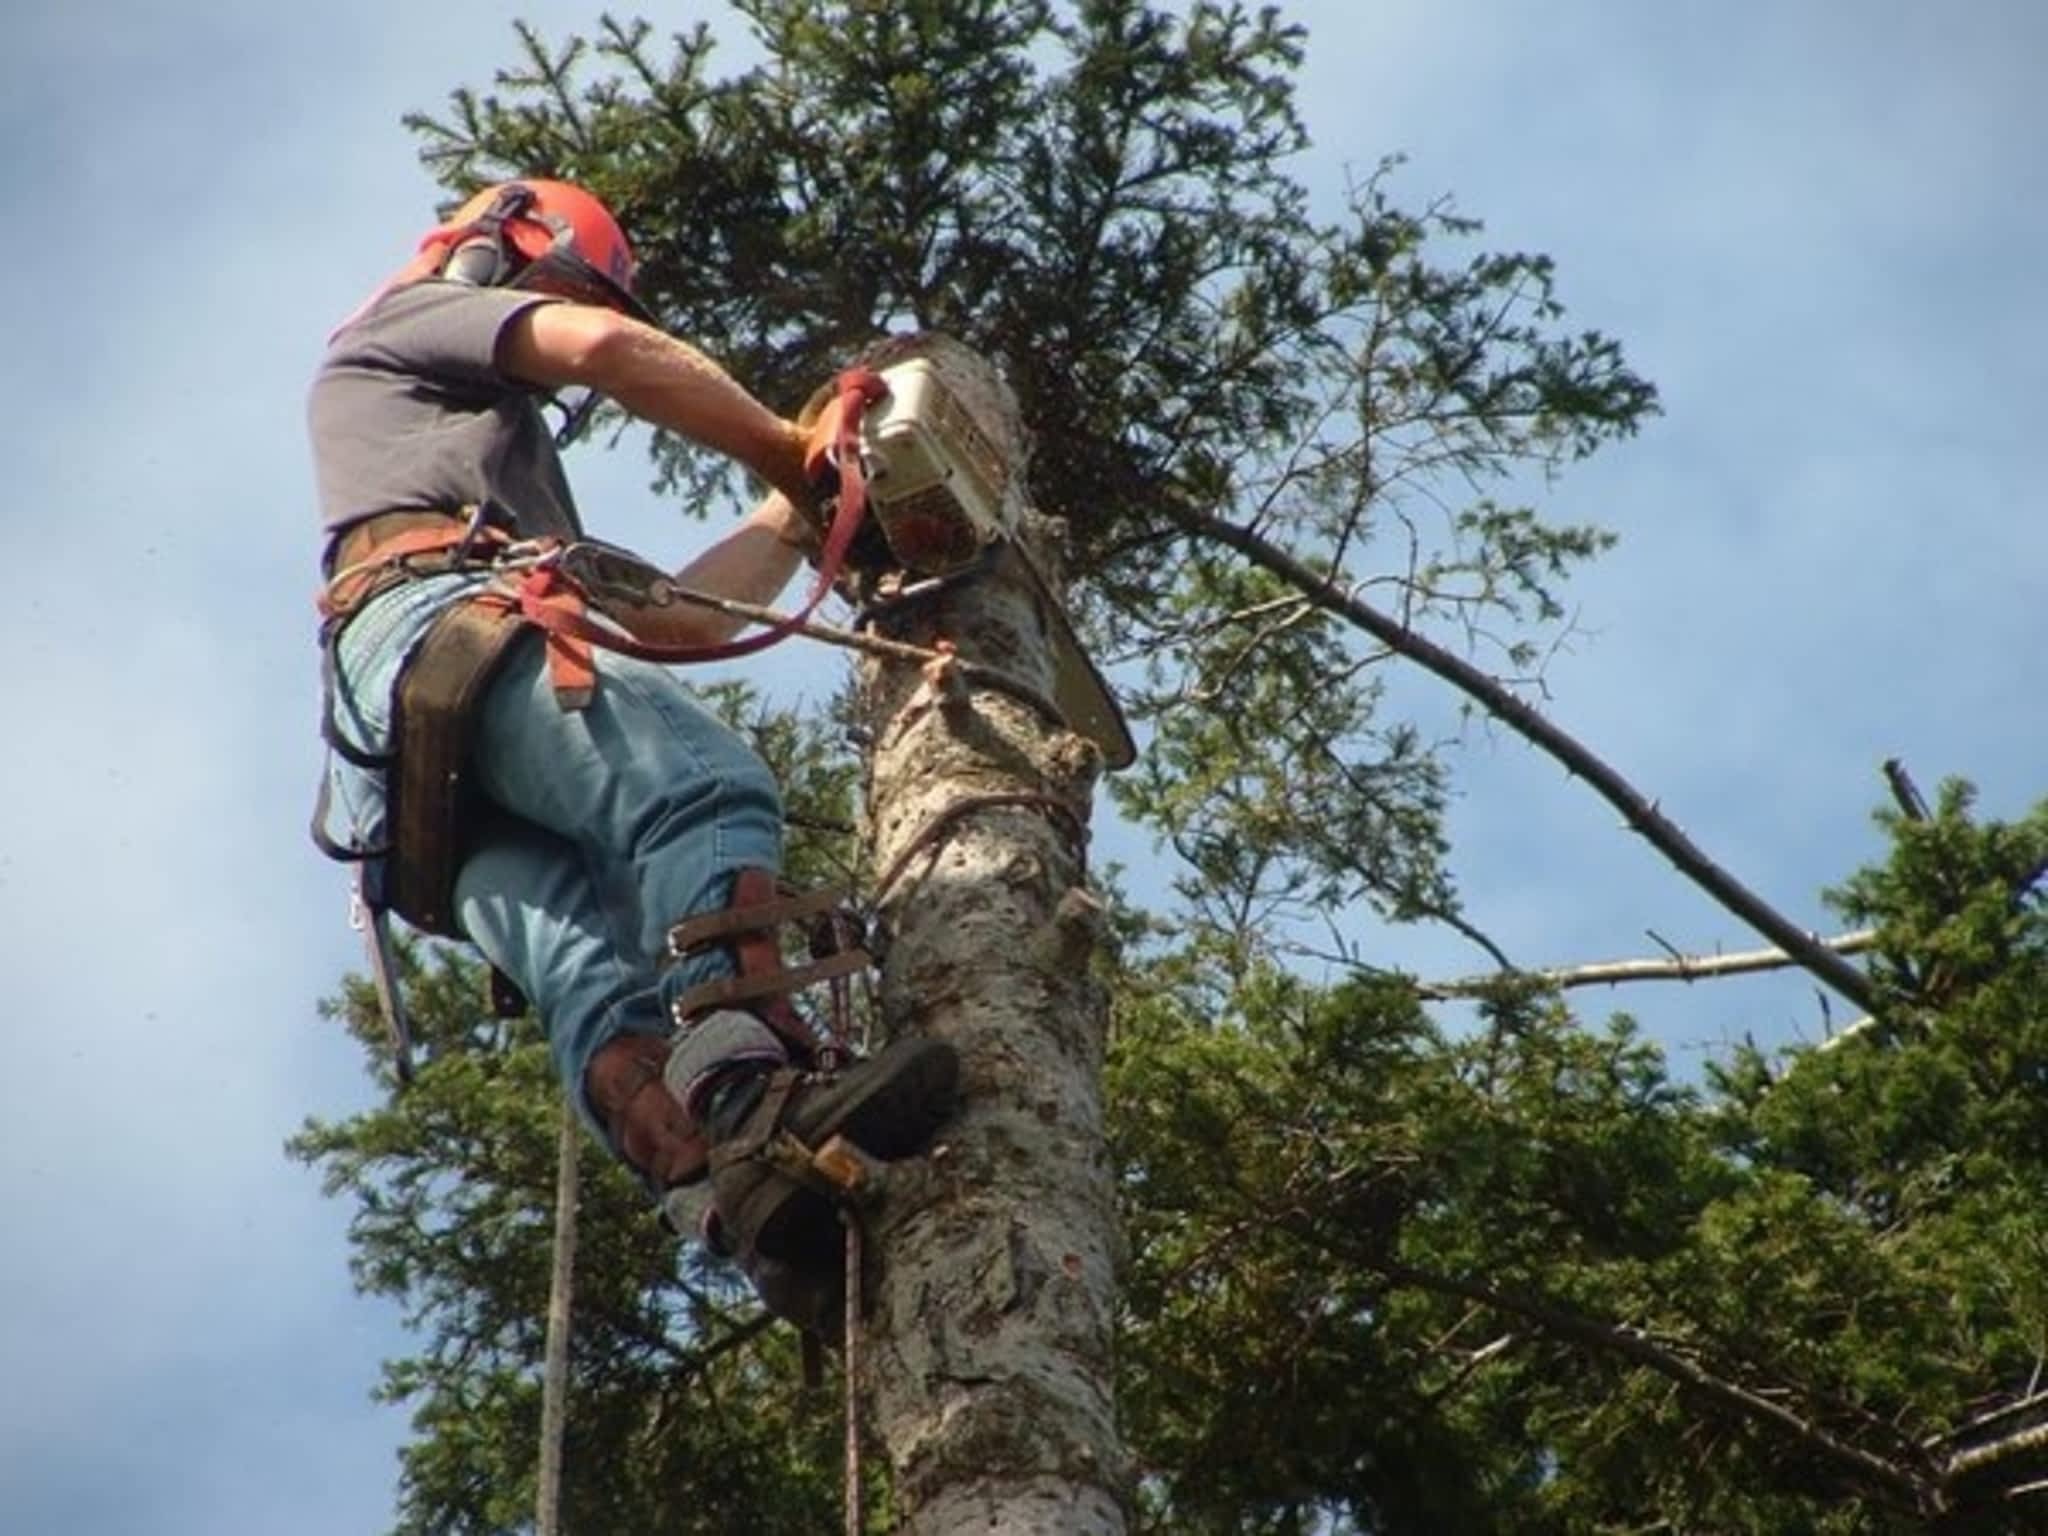 photo Harbourview Tree Experts